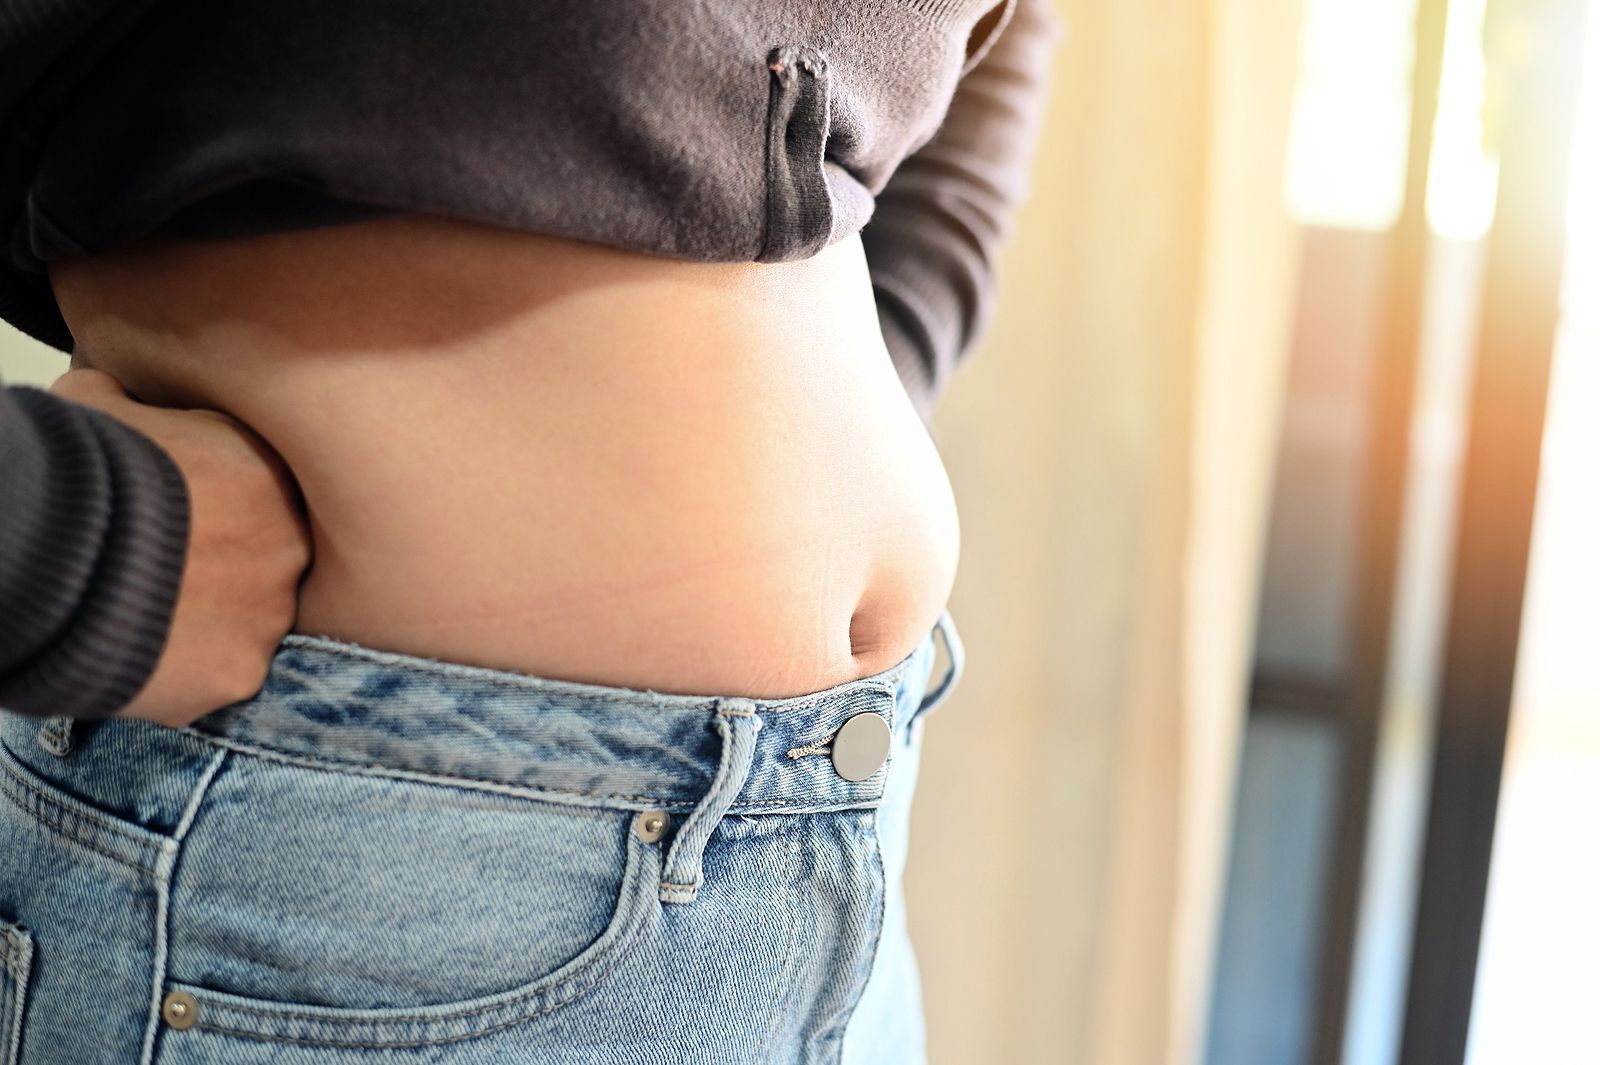 A woman in jeans with her belly fat exposed